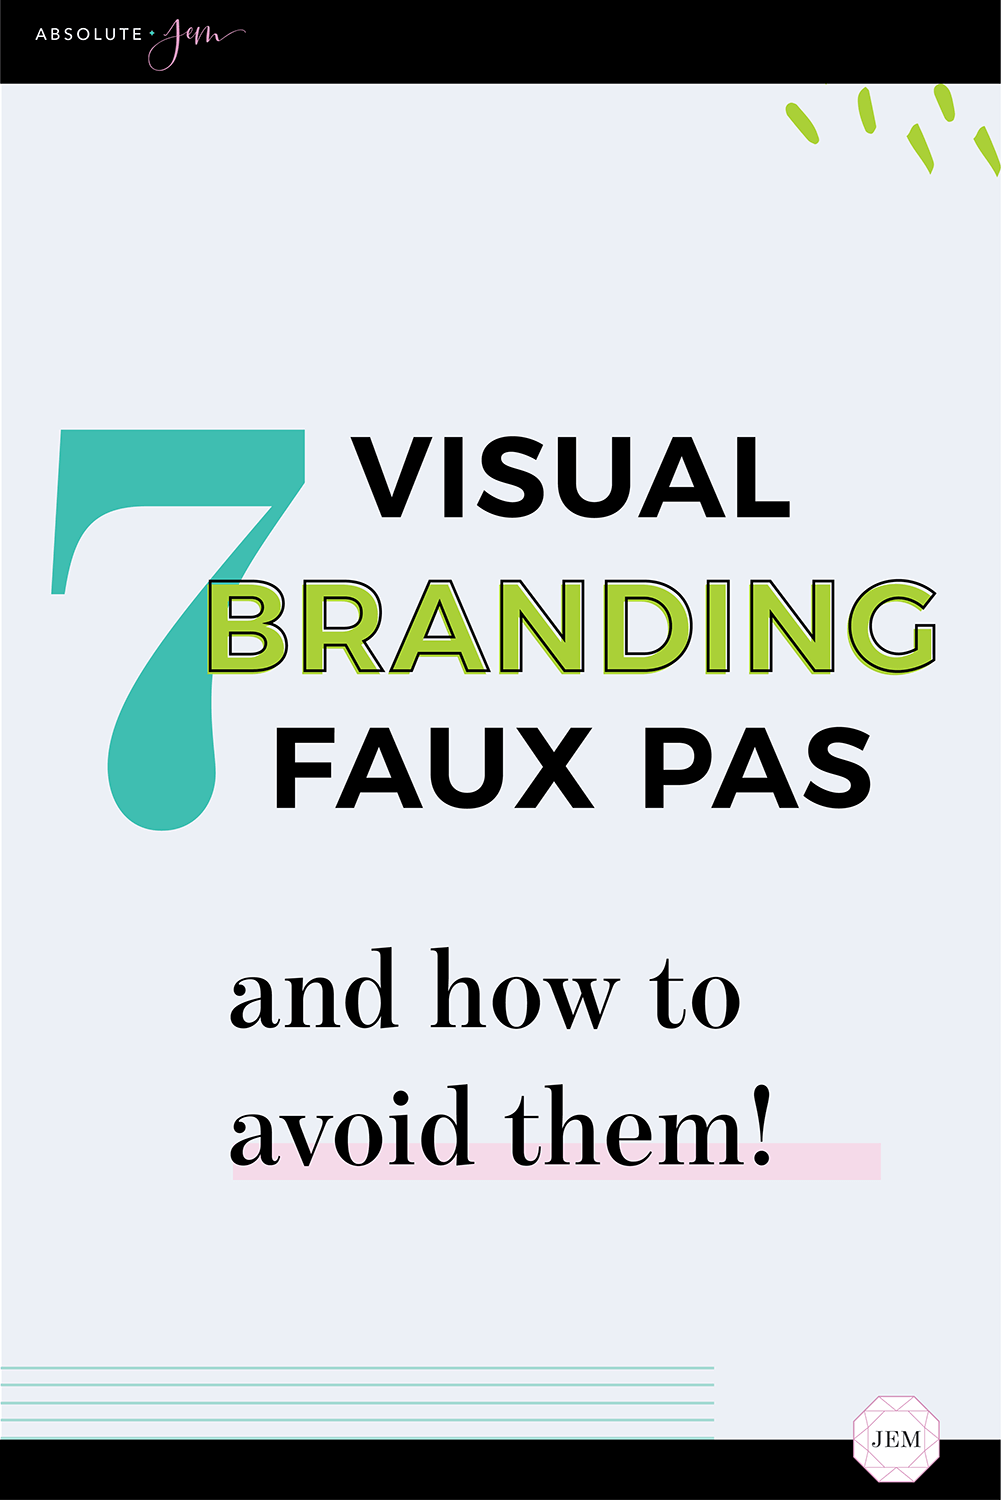 7 Visual Branding Faux Pas – and How To Avoid Them | Absolute JEM Blog